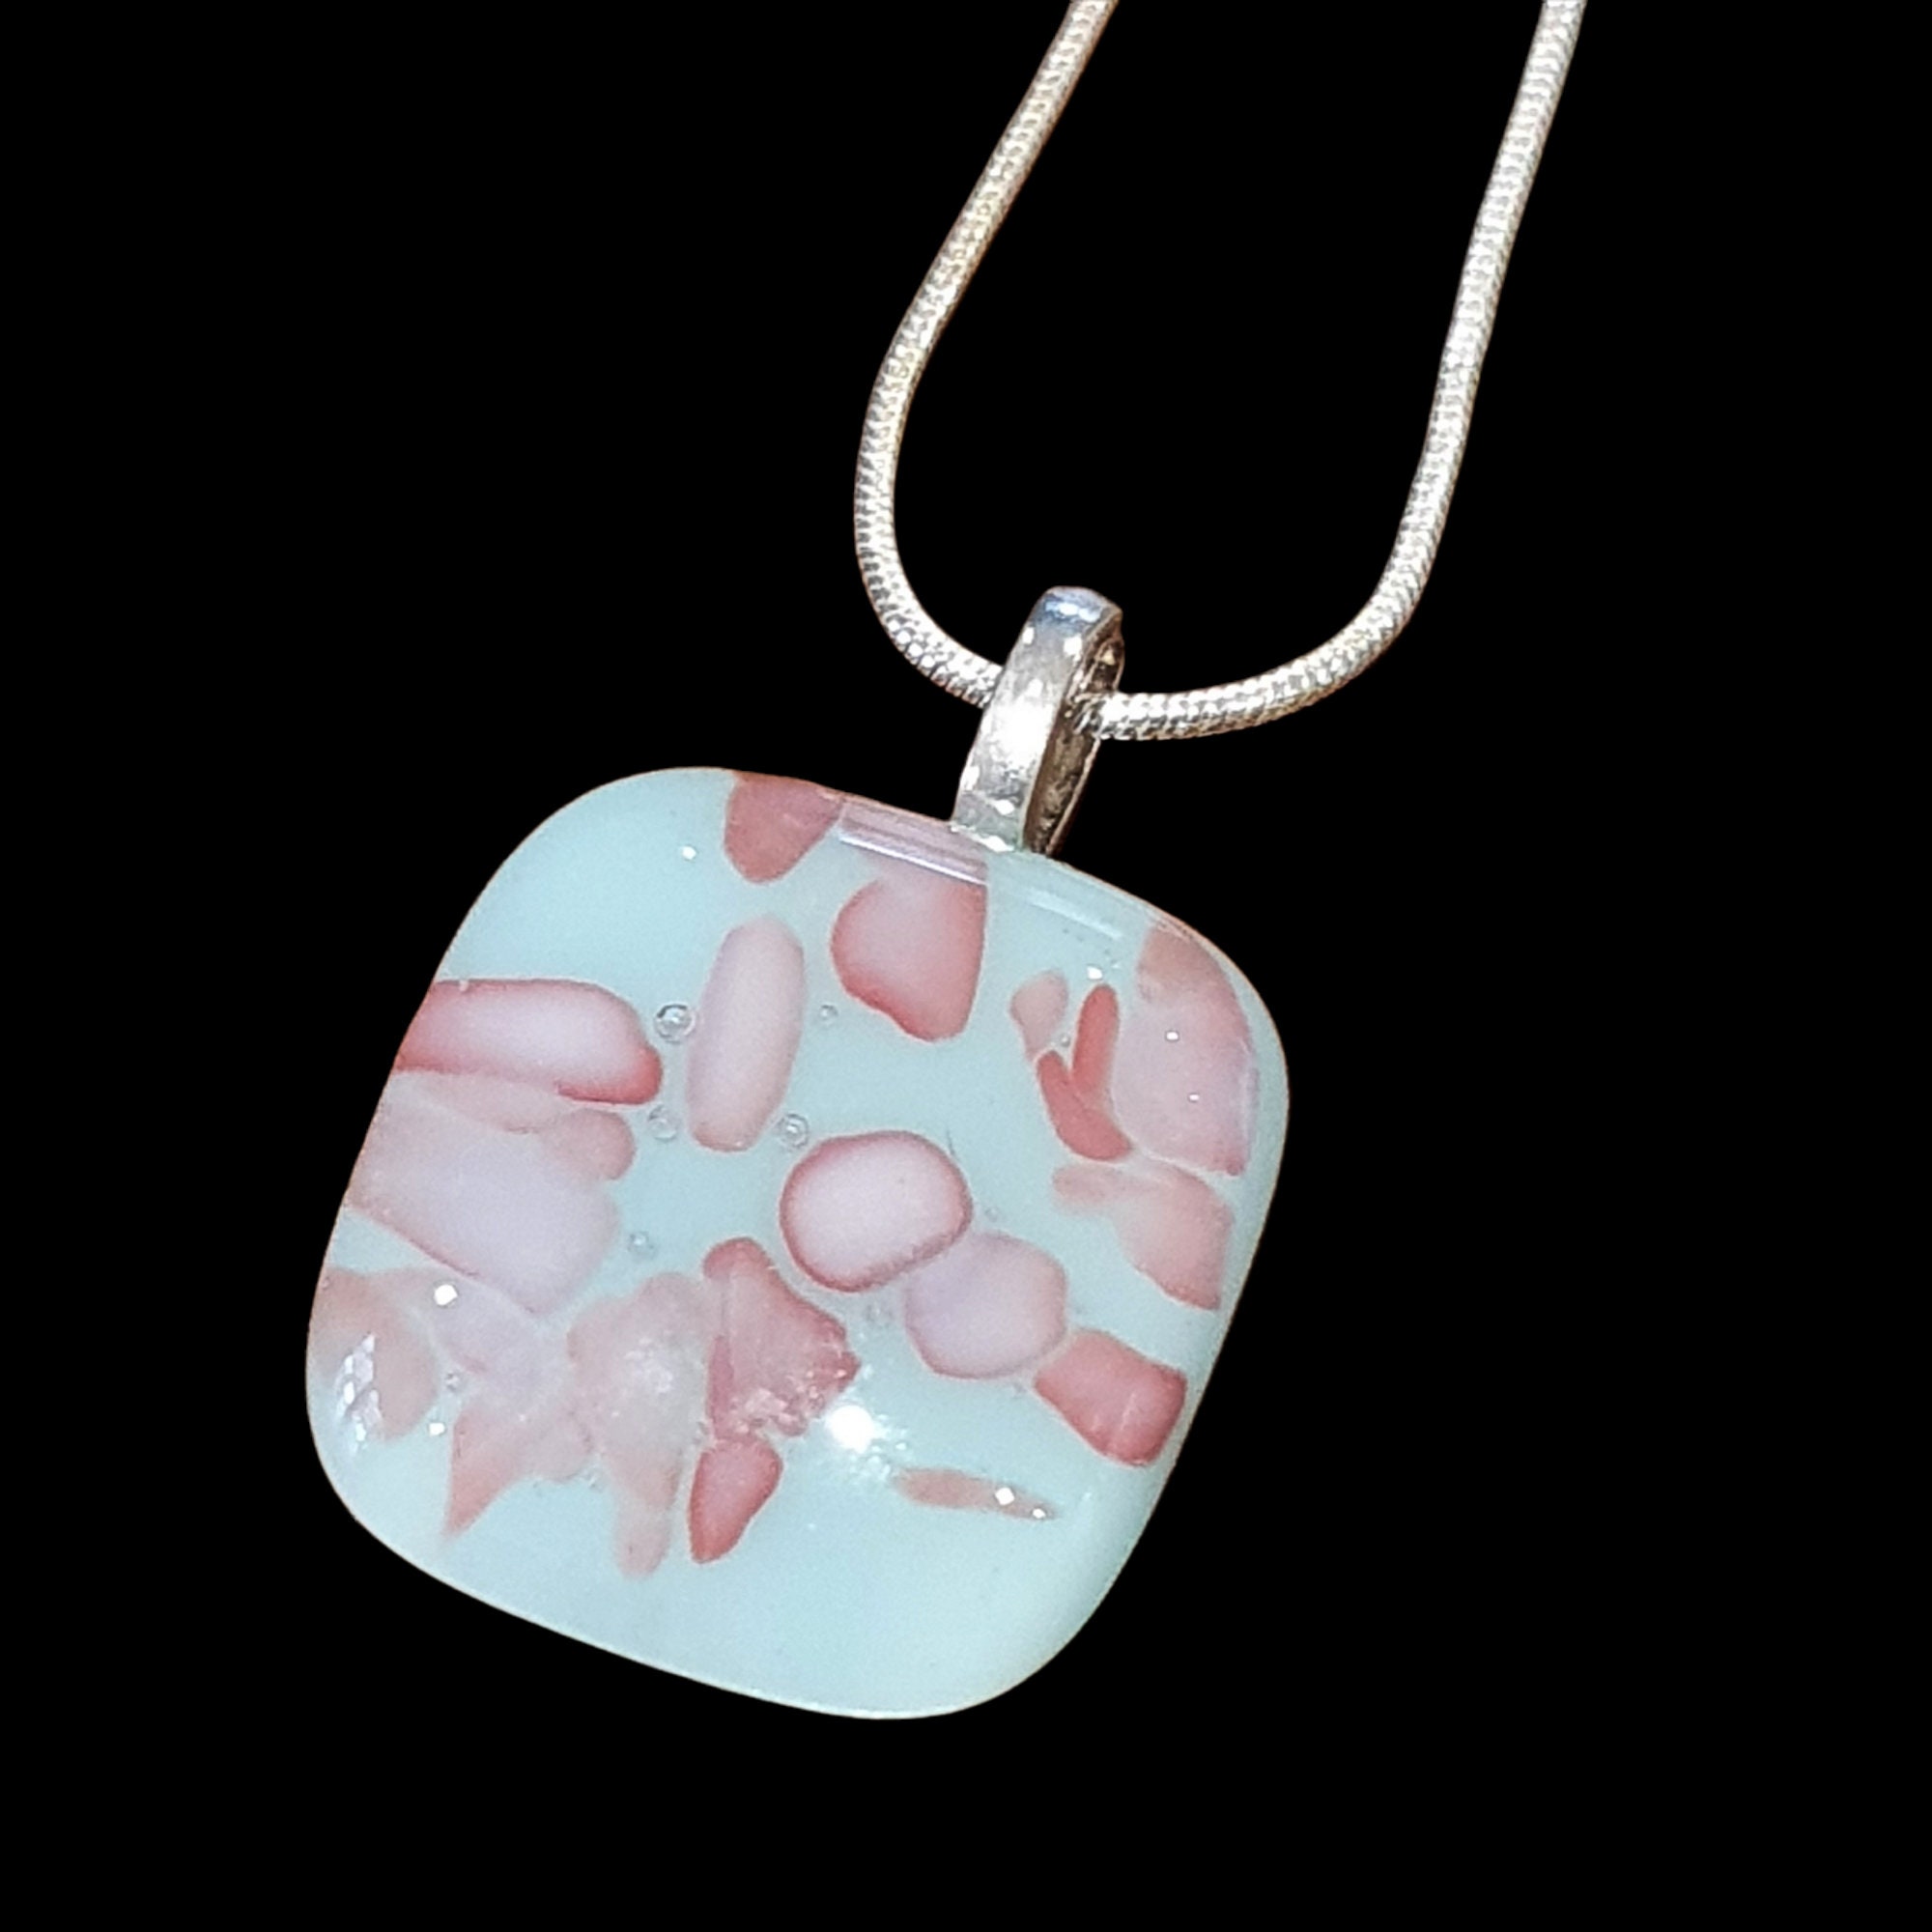 Coral and Blue Pendant Reactions Glass Necklace Sterling Silver Chain